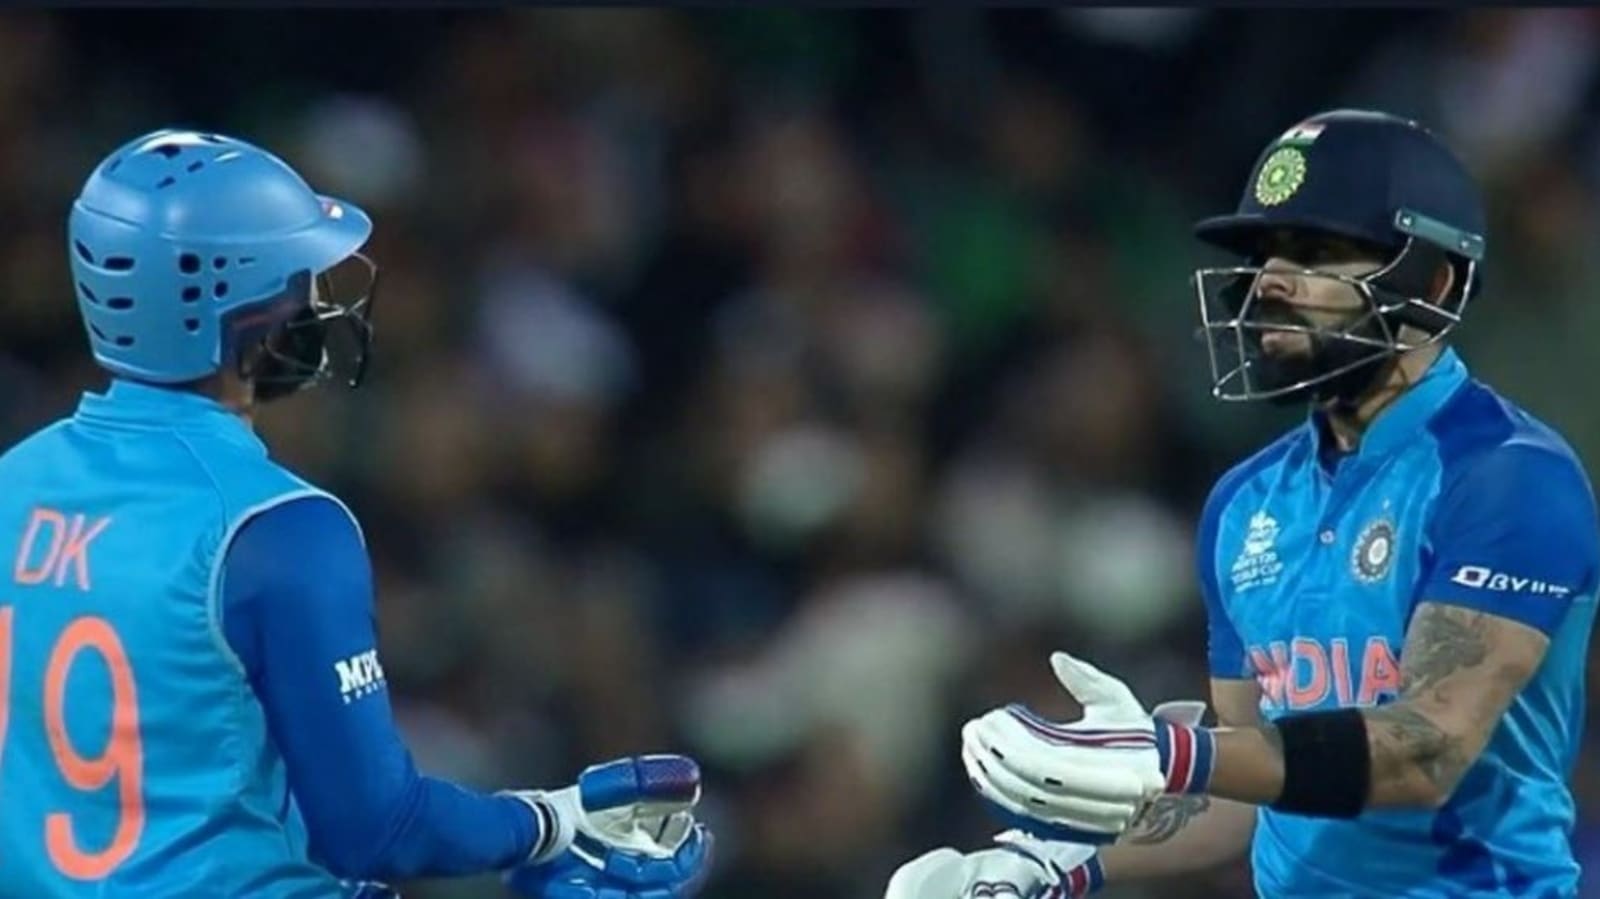 virat-kohli-just-ended-dinesh-karthik-s-career-twitter-fumes-after-india-keeper-s-controversial-run-out-vs-bangladesh